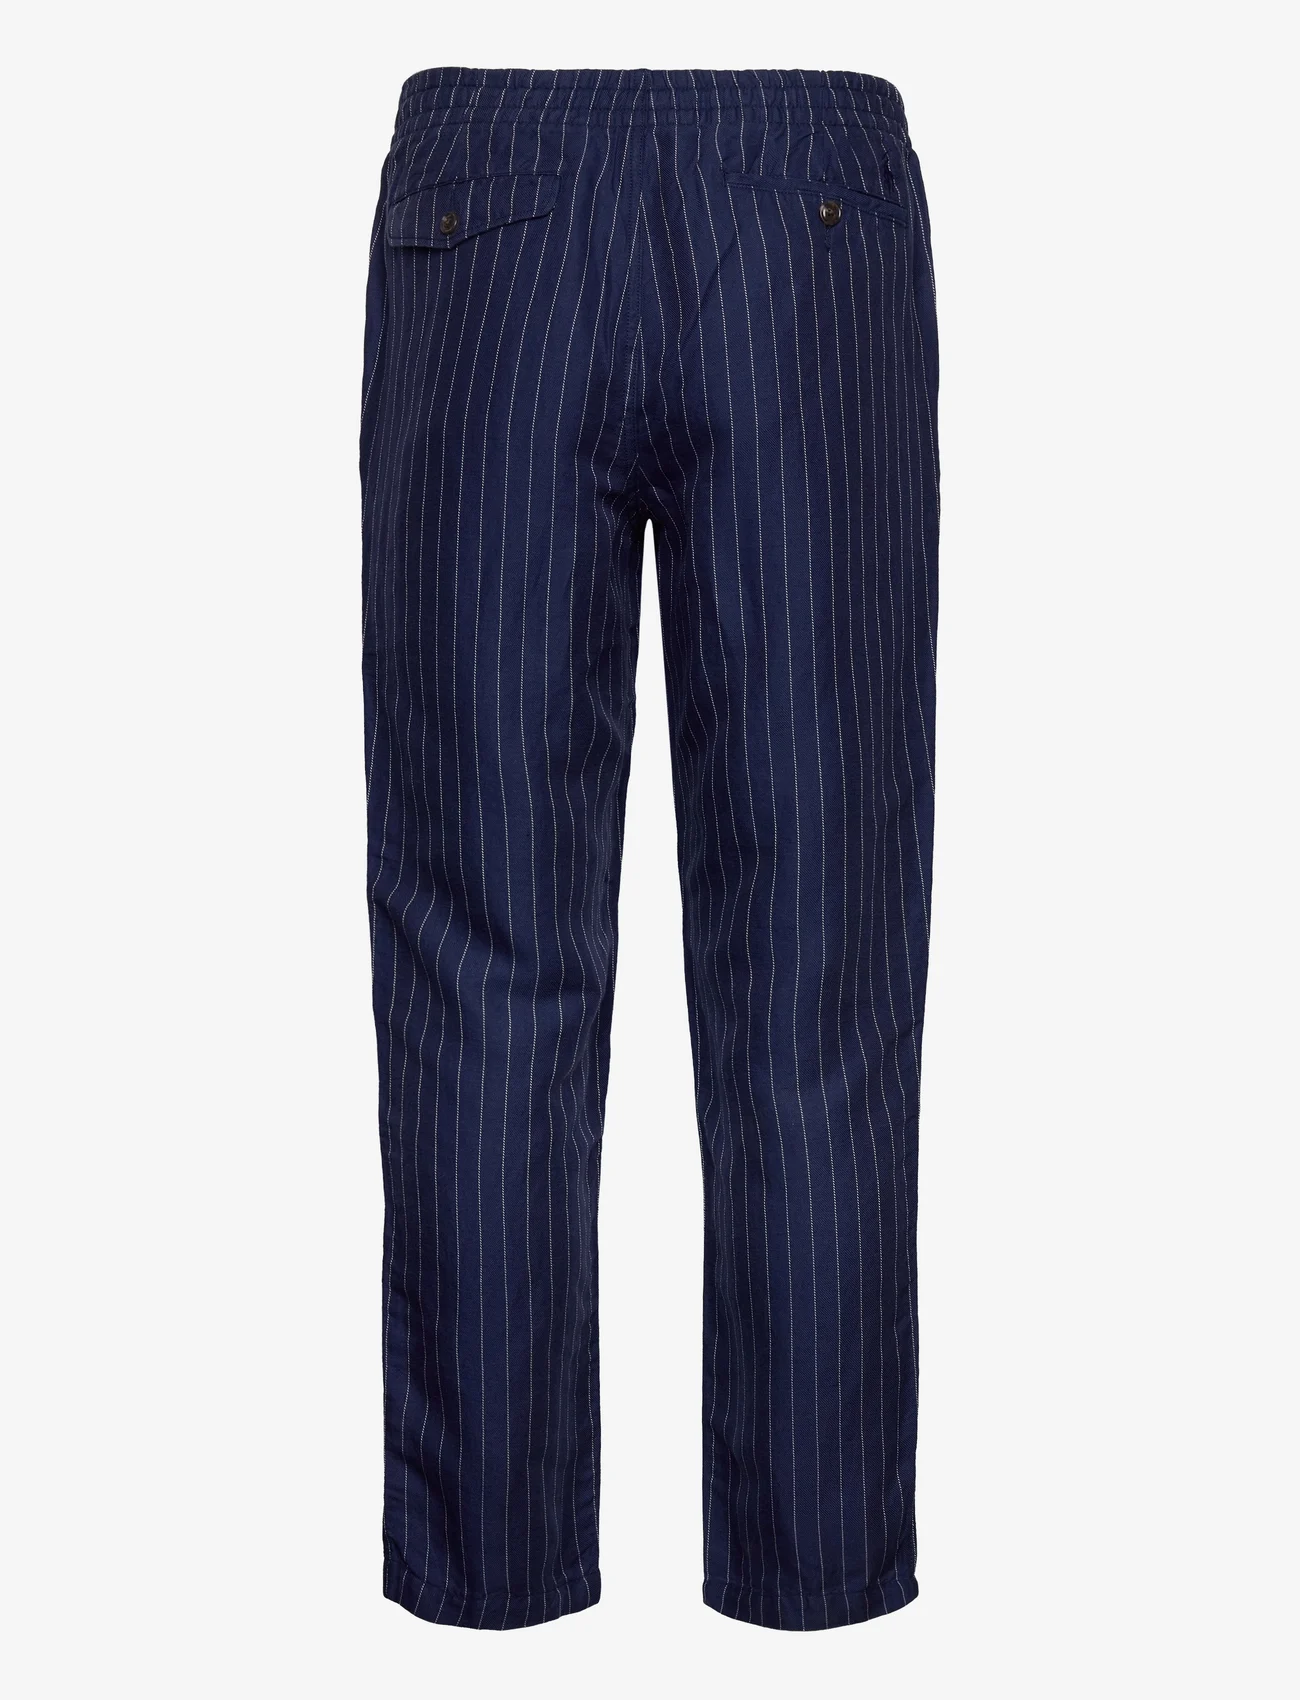 Polo Ralph Lauren - Polo Prepster Classic Fit Twill Pant - casual - navy pinstripe - 1